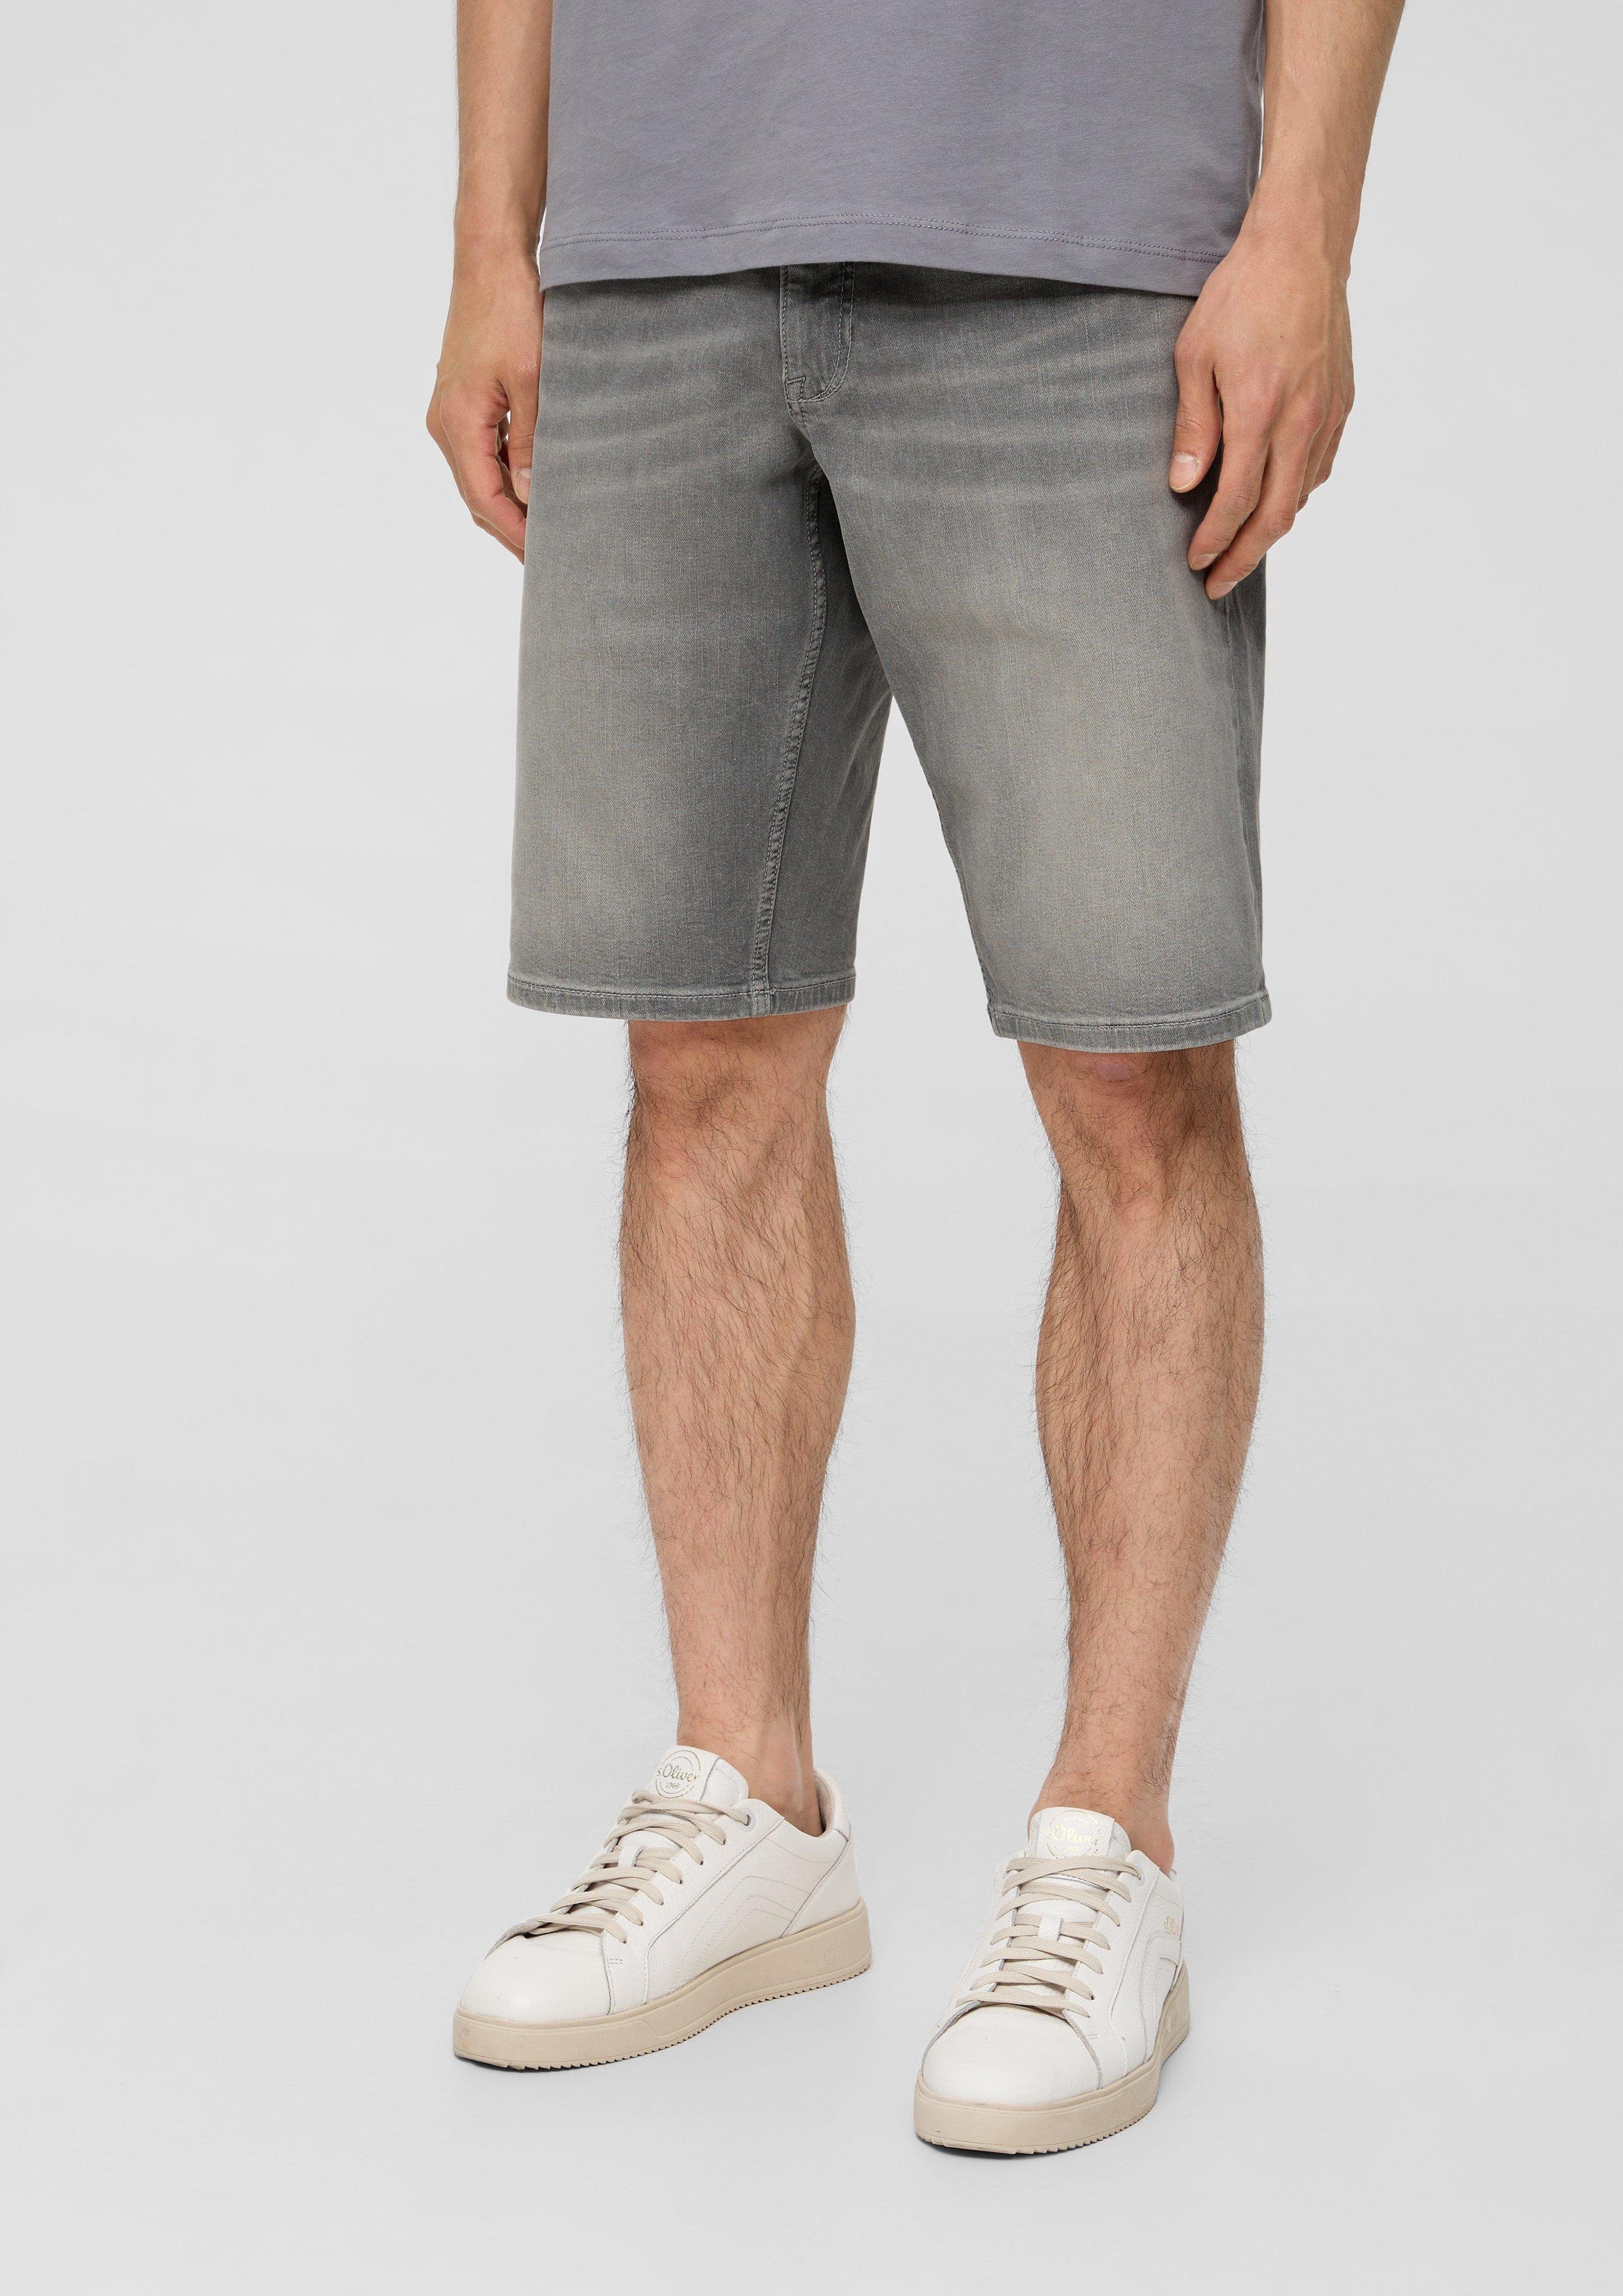 Jeans-Bermuda / Jeansshorts Waschung / Fit Mid Regular s.Oliver Rise